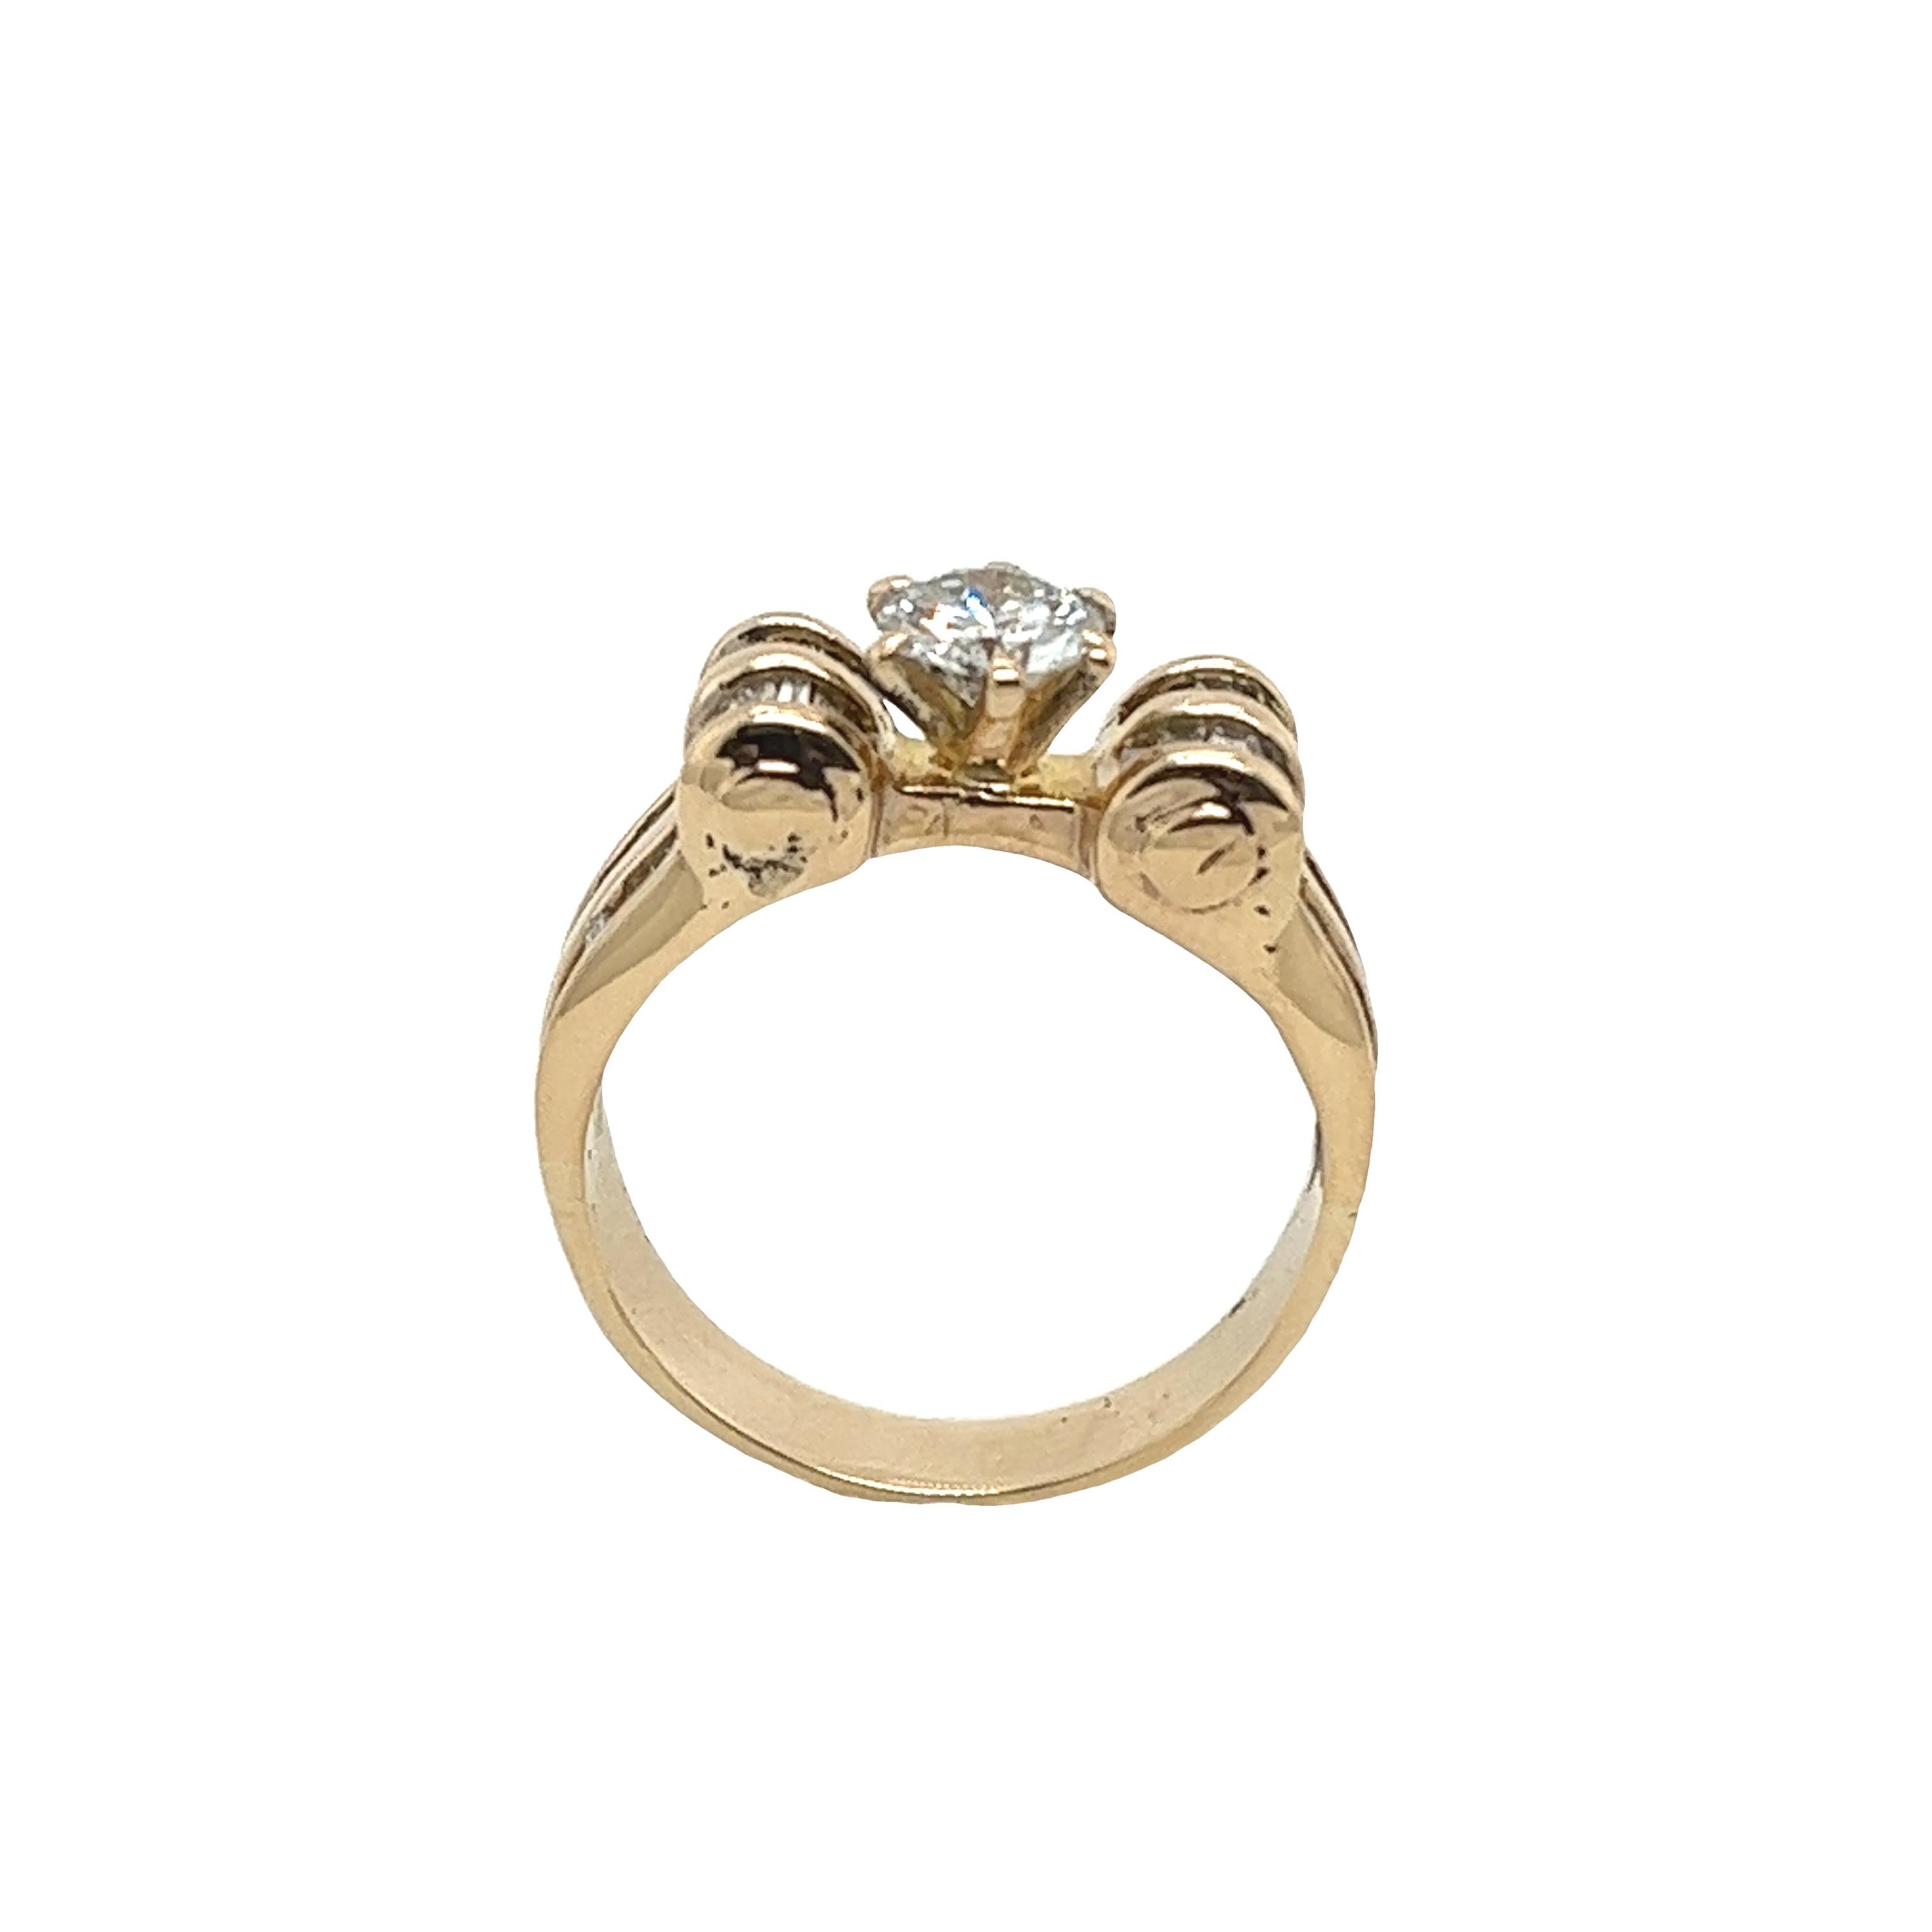 Round Cut 18ct Yellow Gold Diamond Solitaire Ring Set With 0.58ct Round Diamond & 0.43ct For Sale